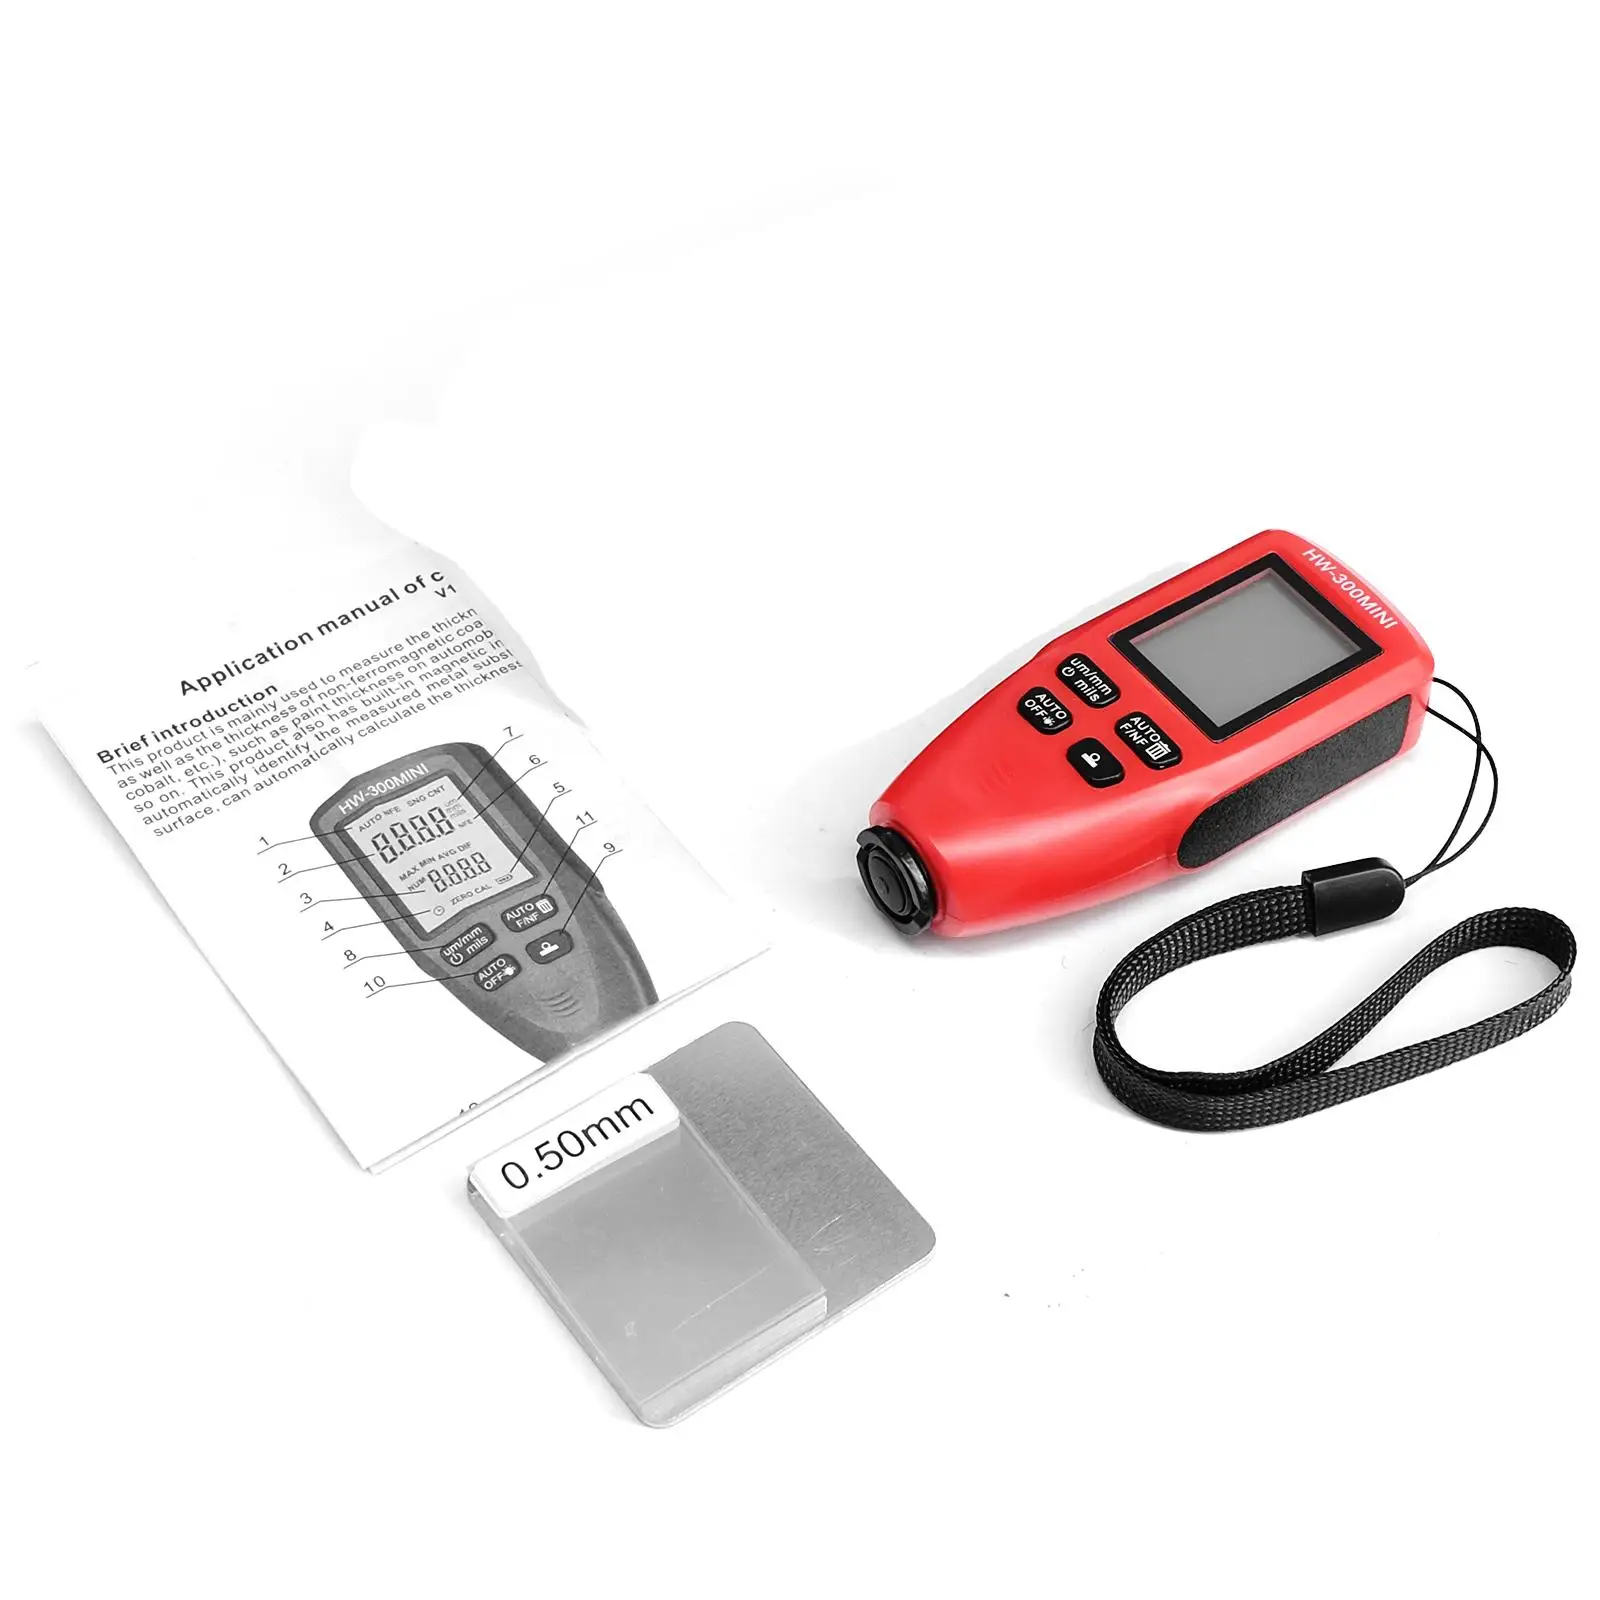 Paint Film Thickness Tester 0-2000Um for Iron and Aluminium Bodies Workshops